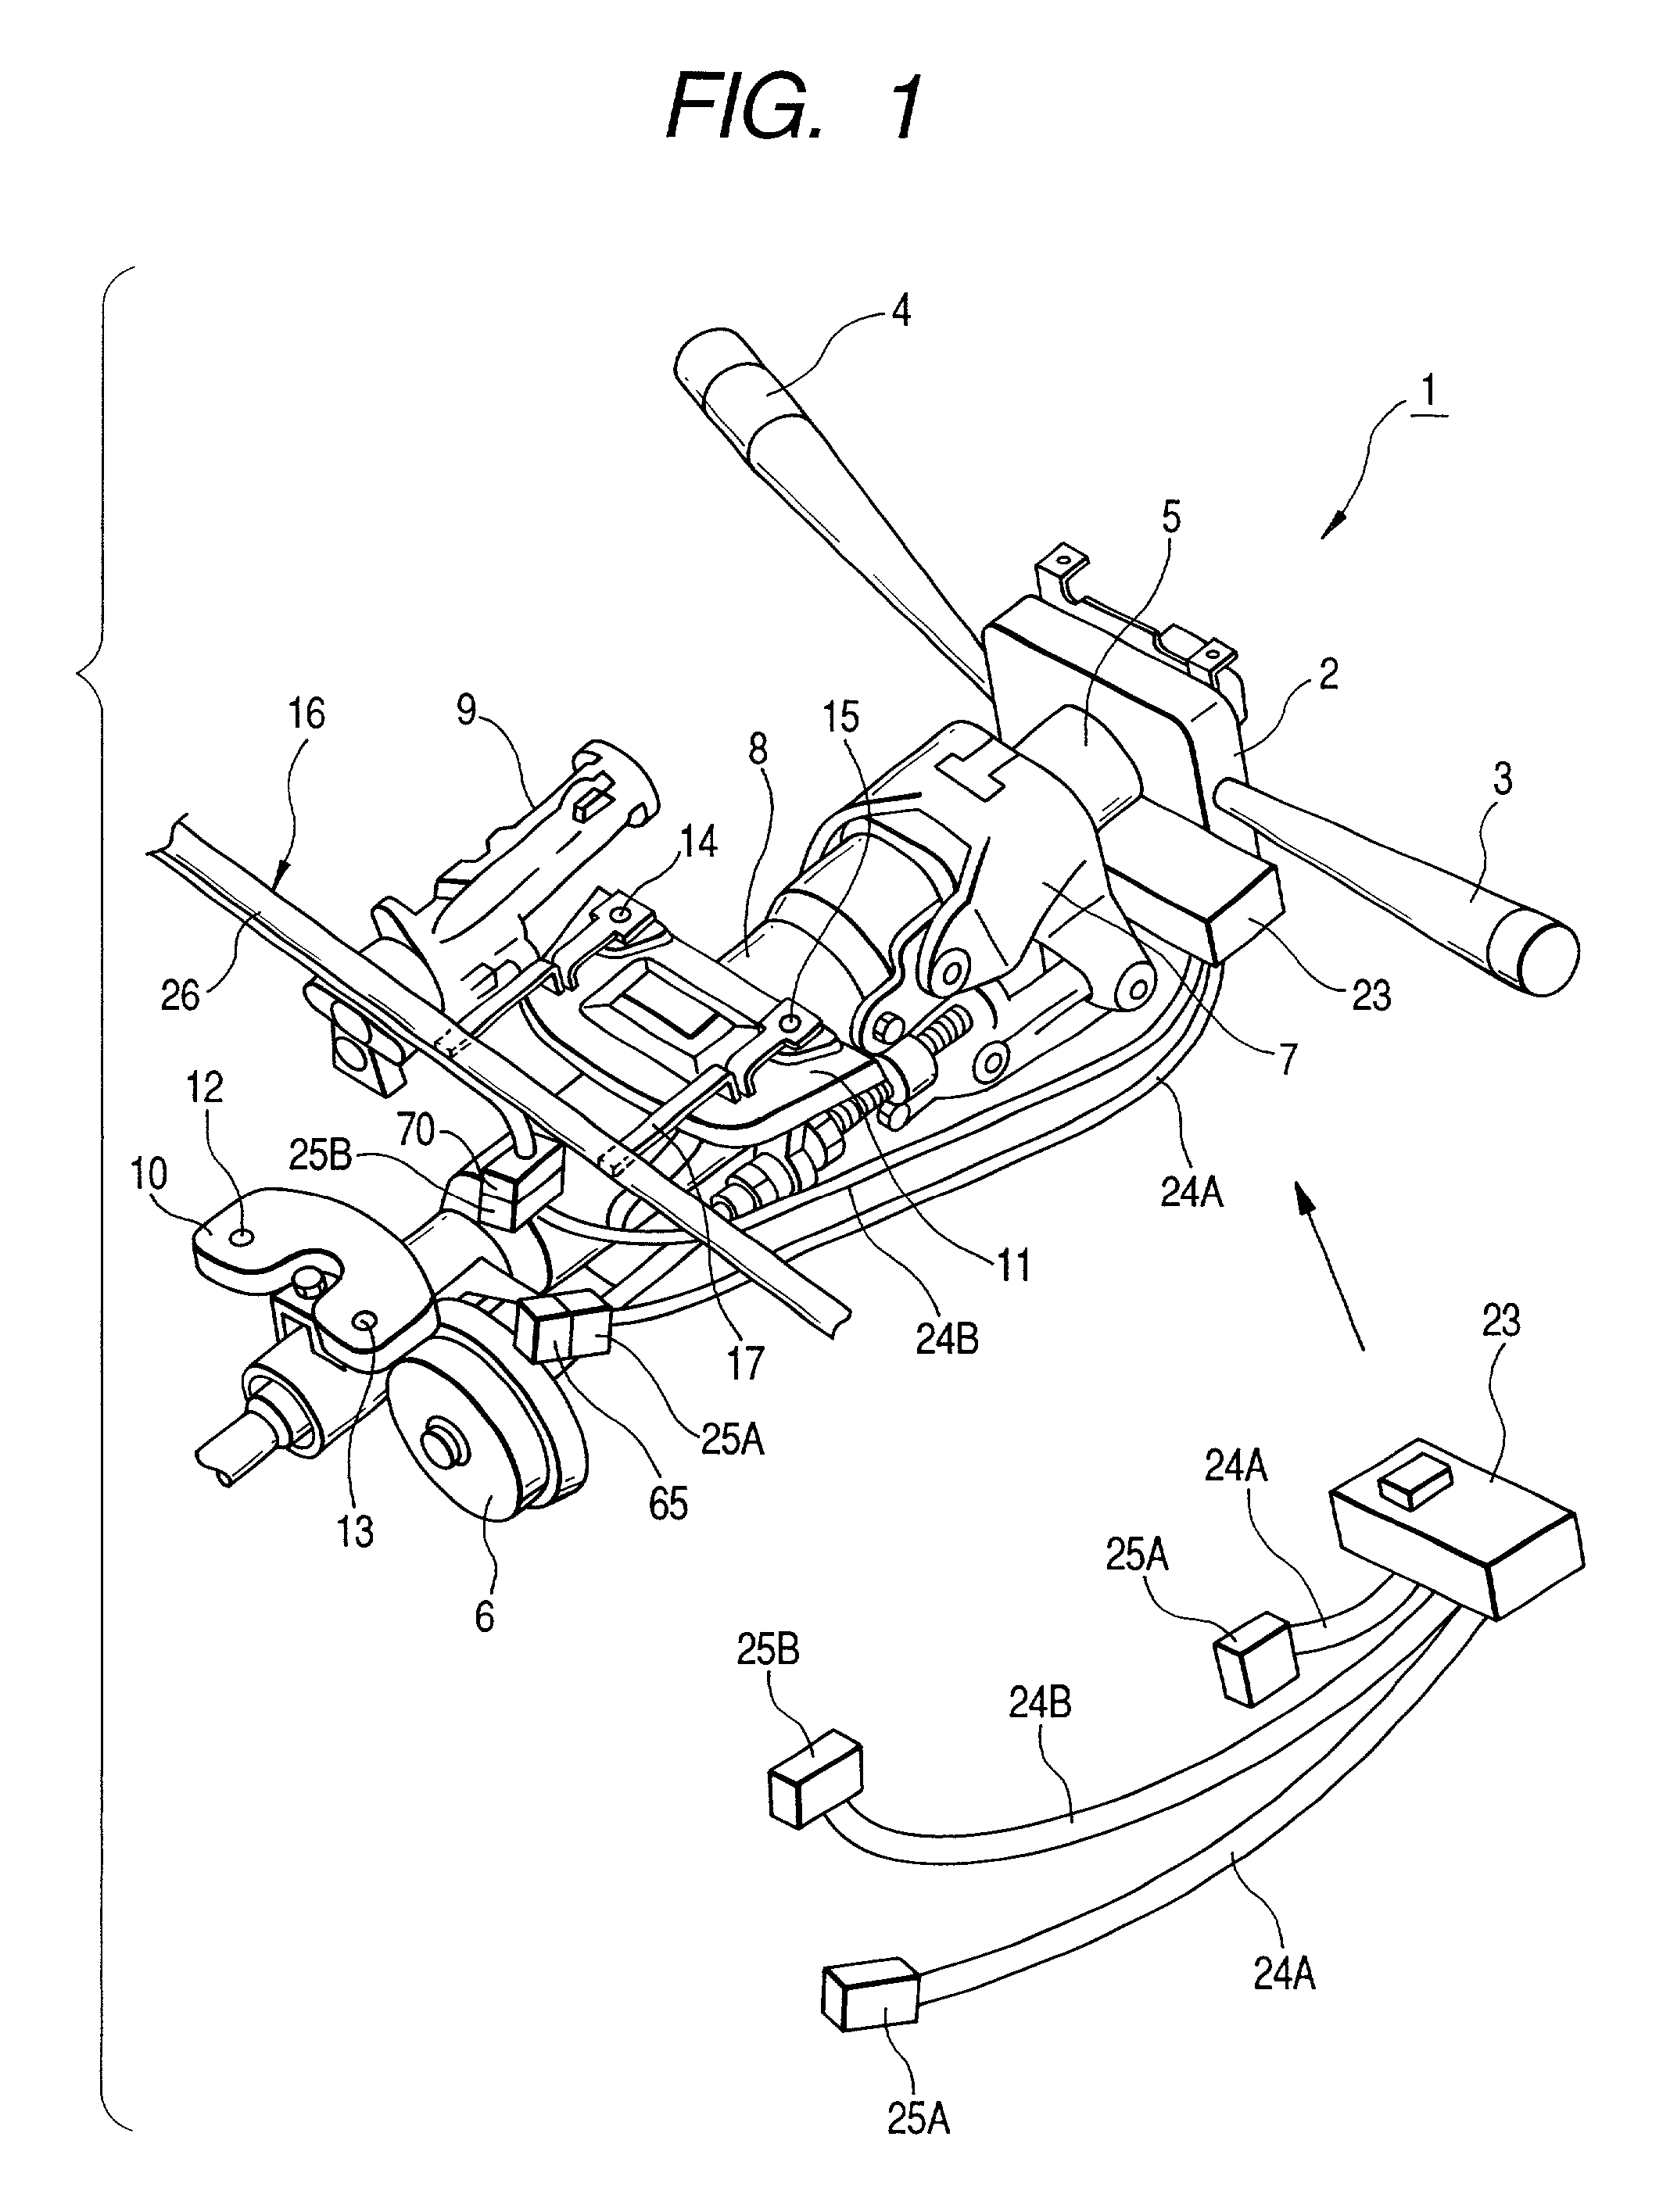 Steering wire harness, steering module, and wiring system of steering wire harness